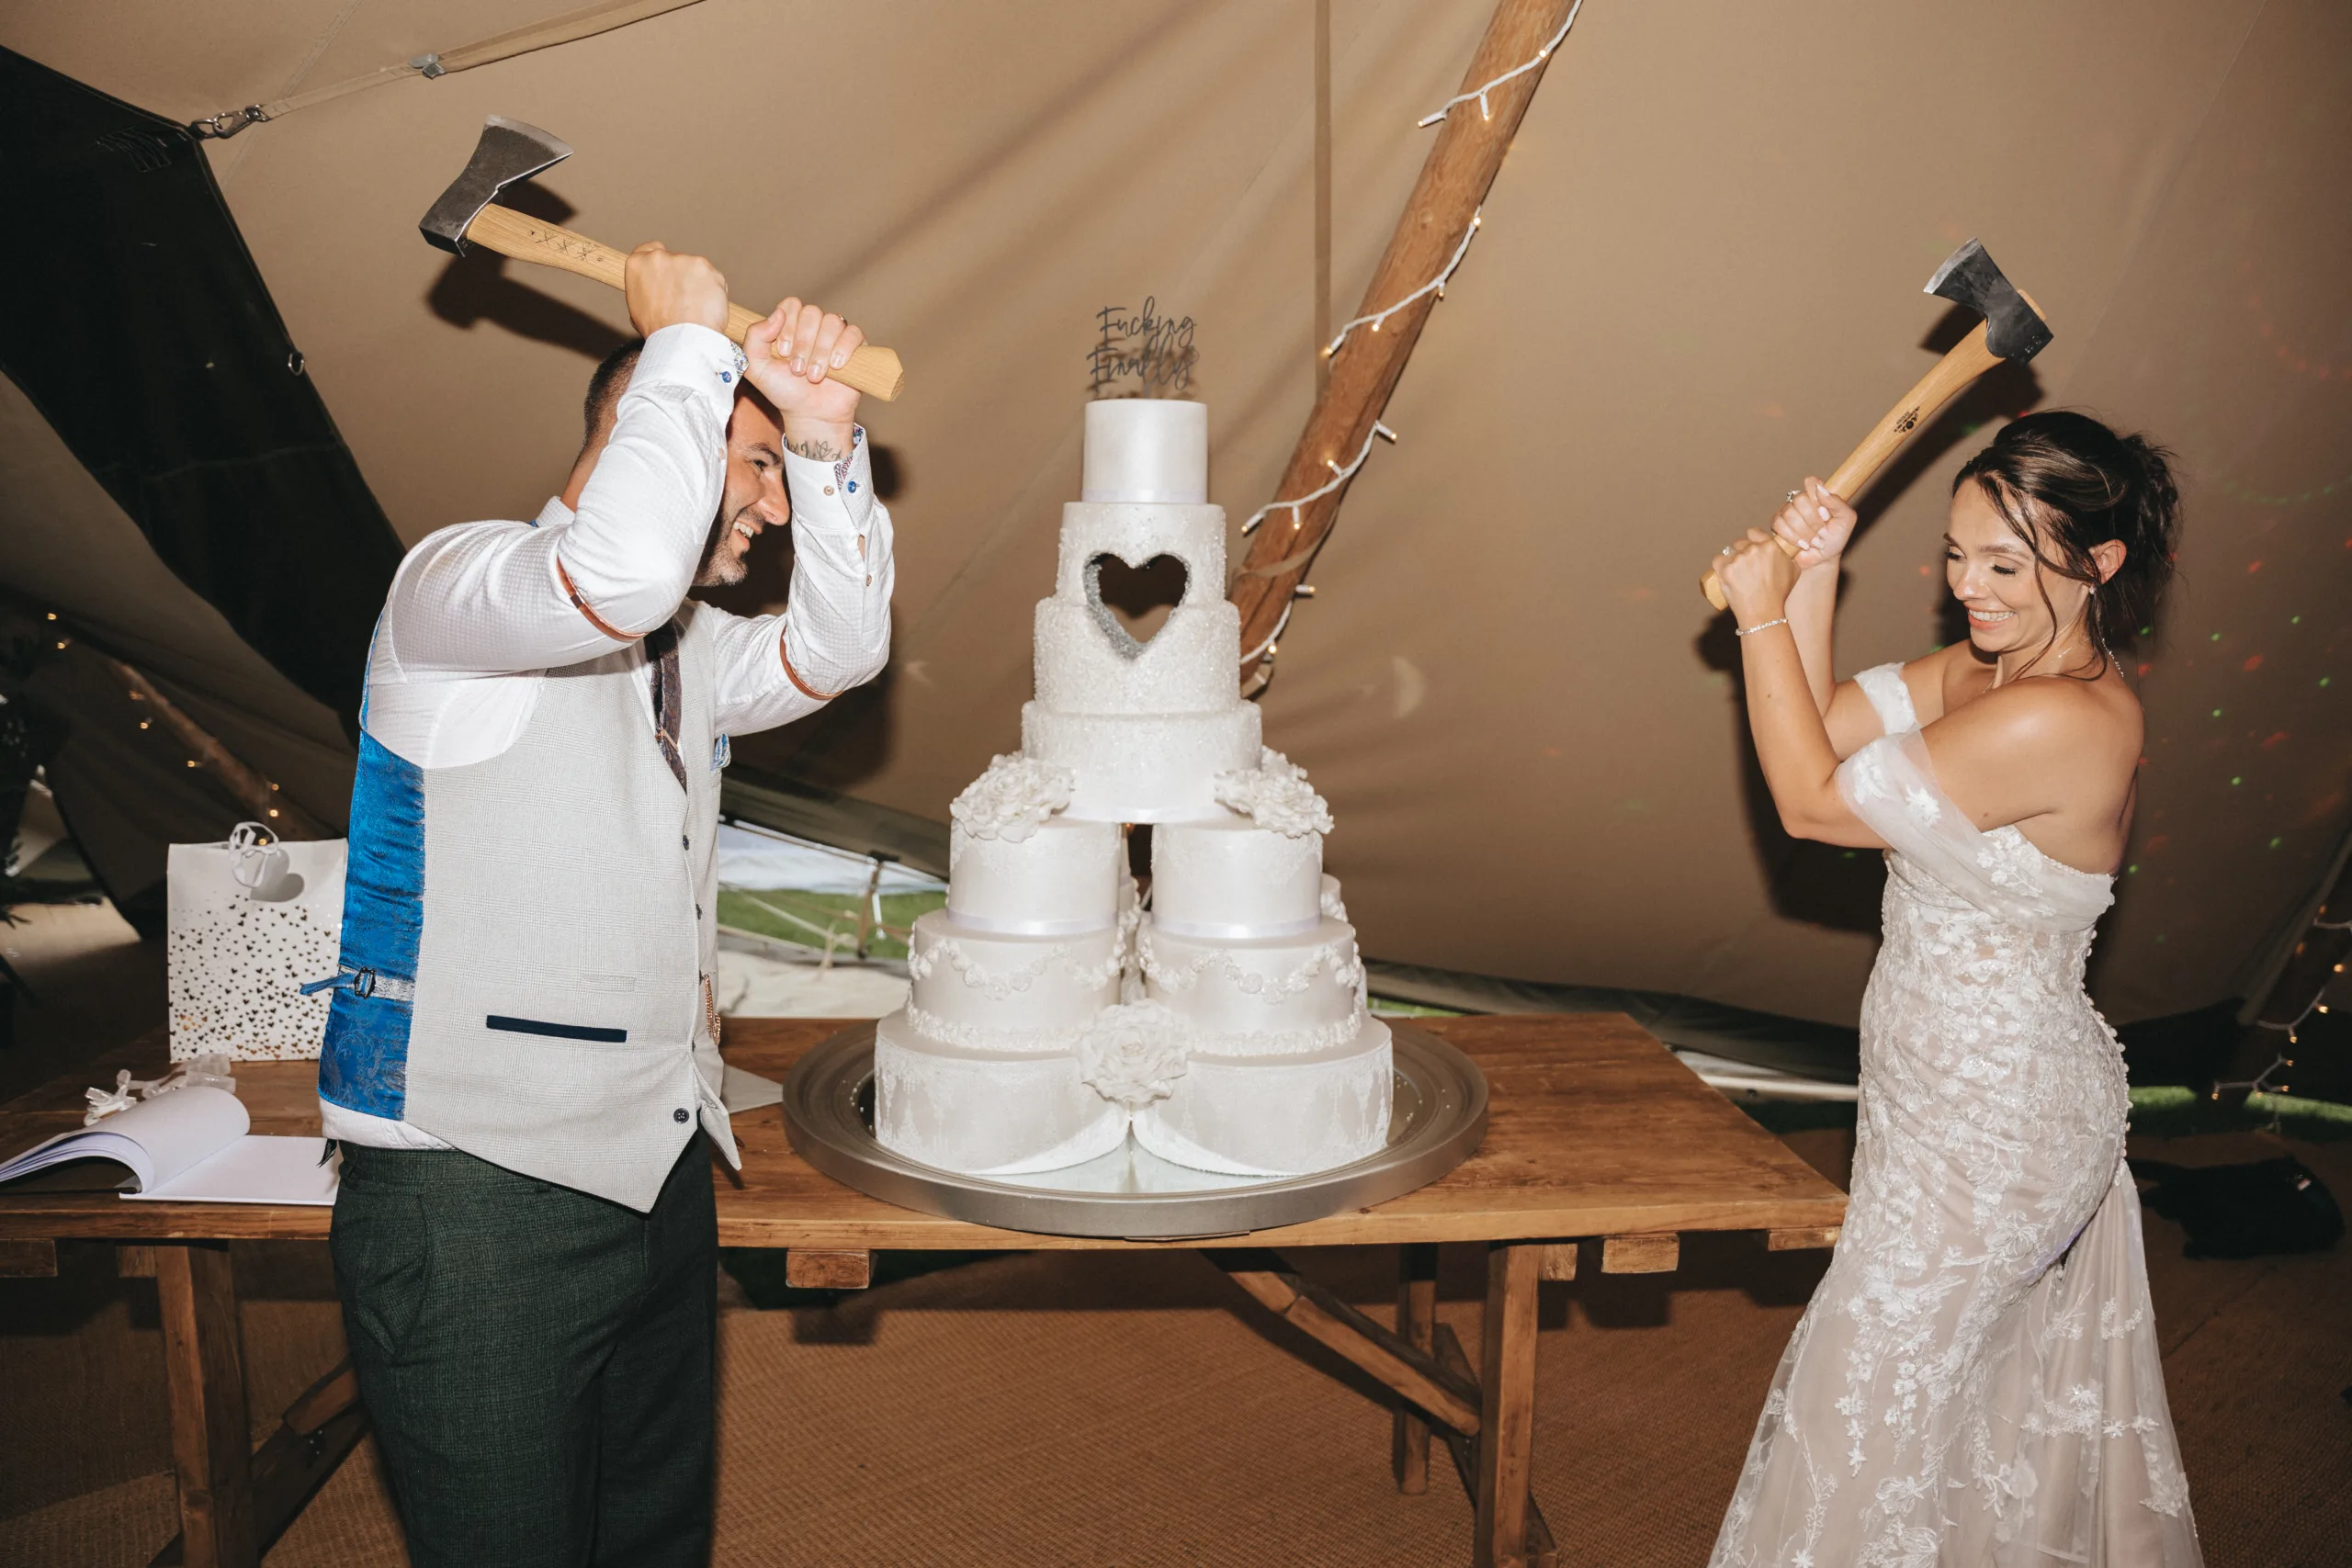 A bride and groom cutting their wedding cake with a hammer while a photographer captures the moment.